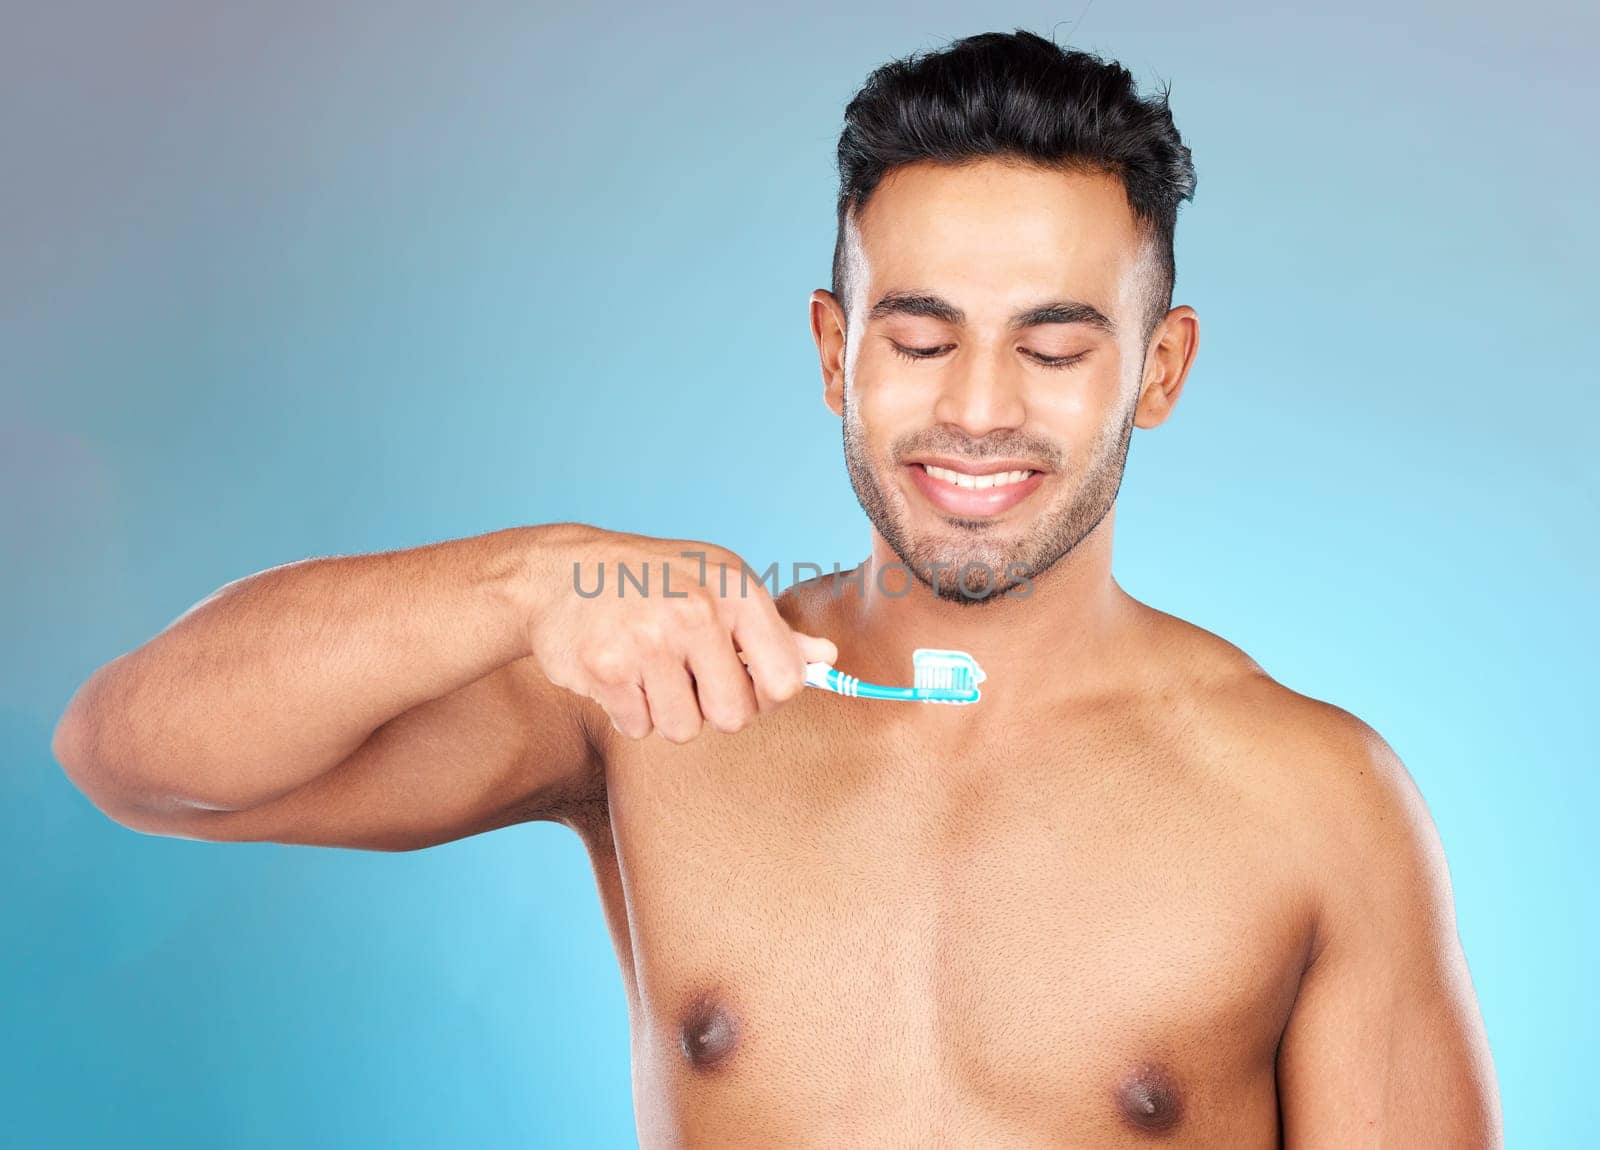 Teeth, dental care and man brushing teeth with toothbrush and toothpaste on blue background with smile on face. Morning routine, healthcare and fresh, happy male model from India in studio portrait